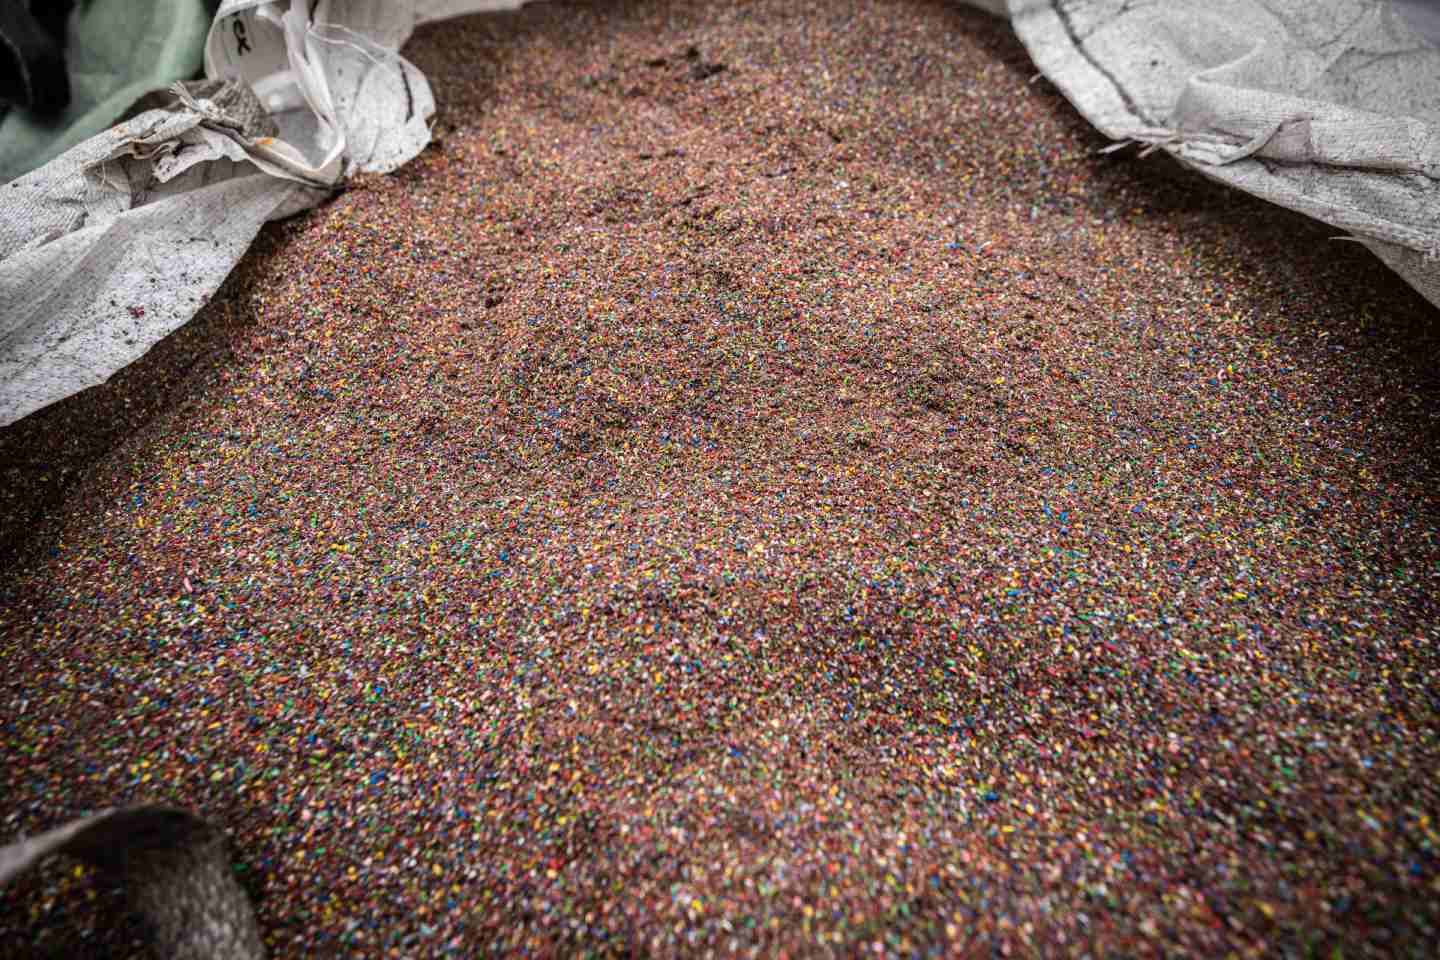 Granulated plastic as the final process of plastic recycling in the Jugo-Impex recycling center.